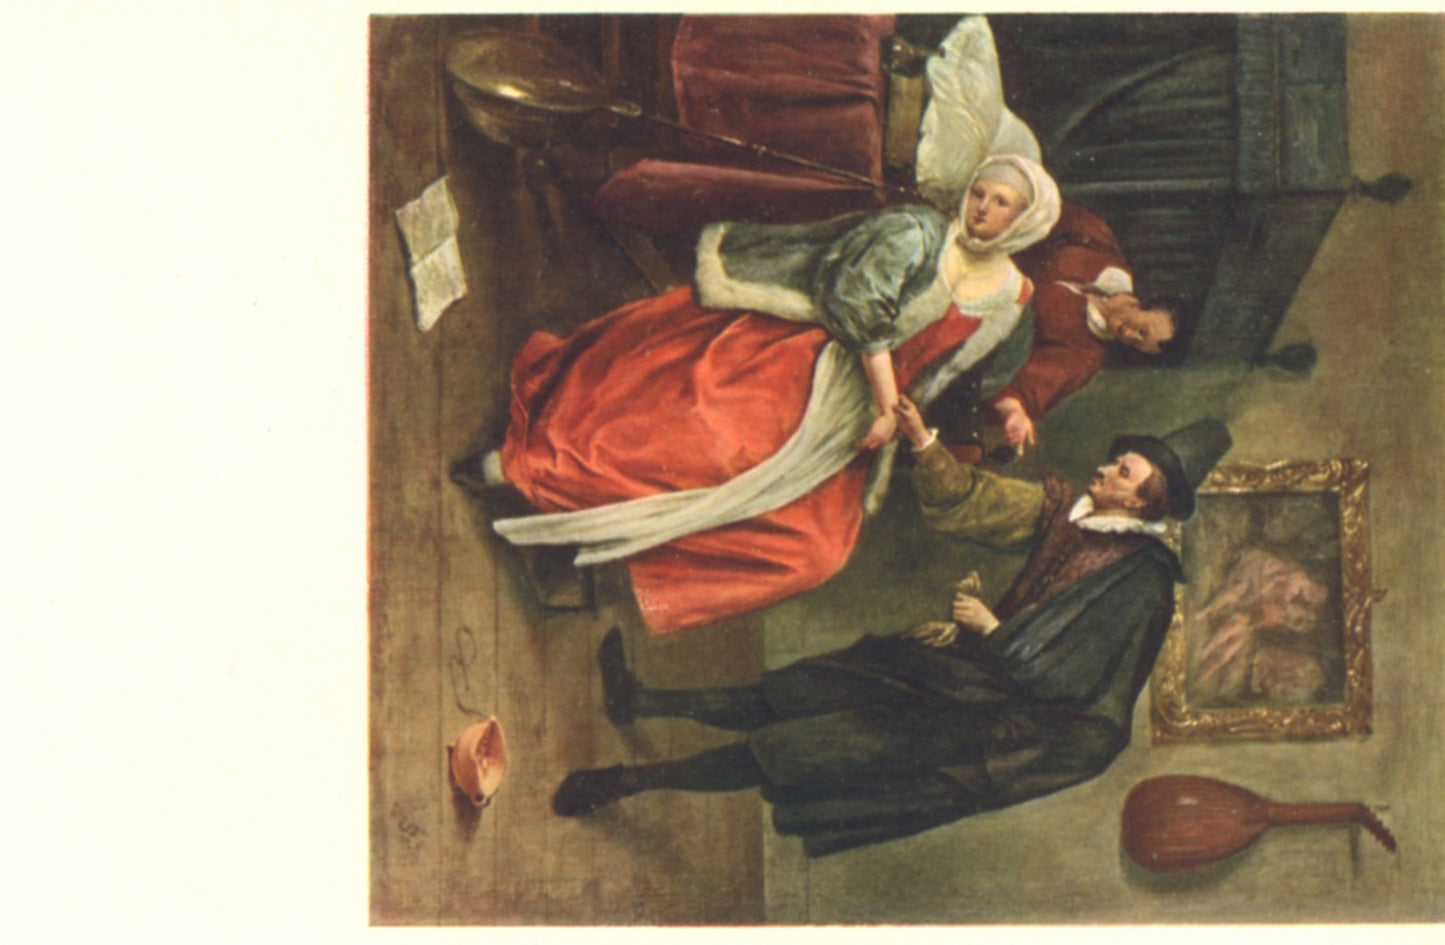 Vintage souvenir postcard from the Taft Museum located in Cincinnati, Ohio. Depicts the painting, "A Physician Visiting a Sick Girl" by Jan Steen (1626? - 1679)